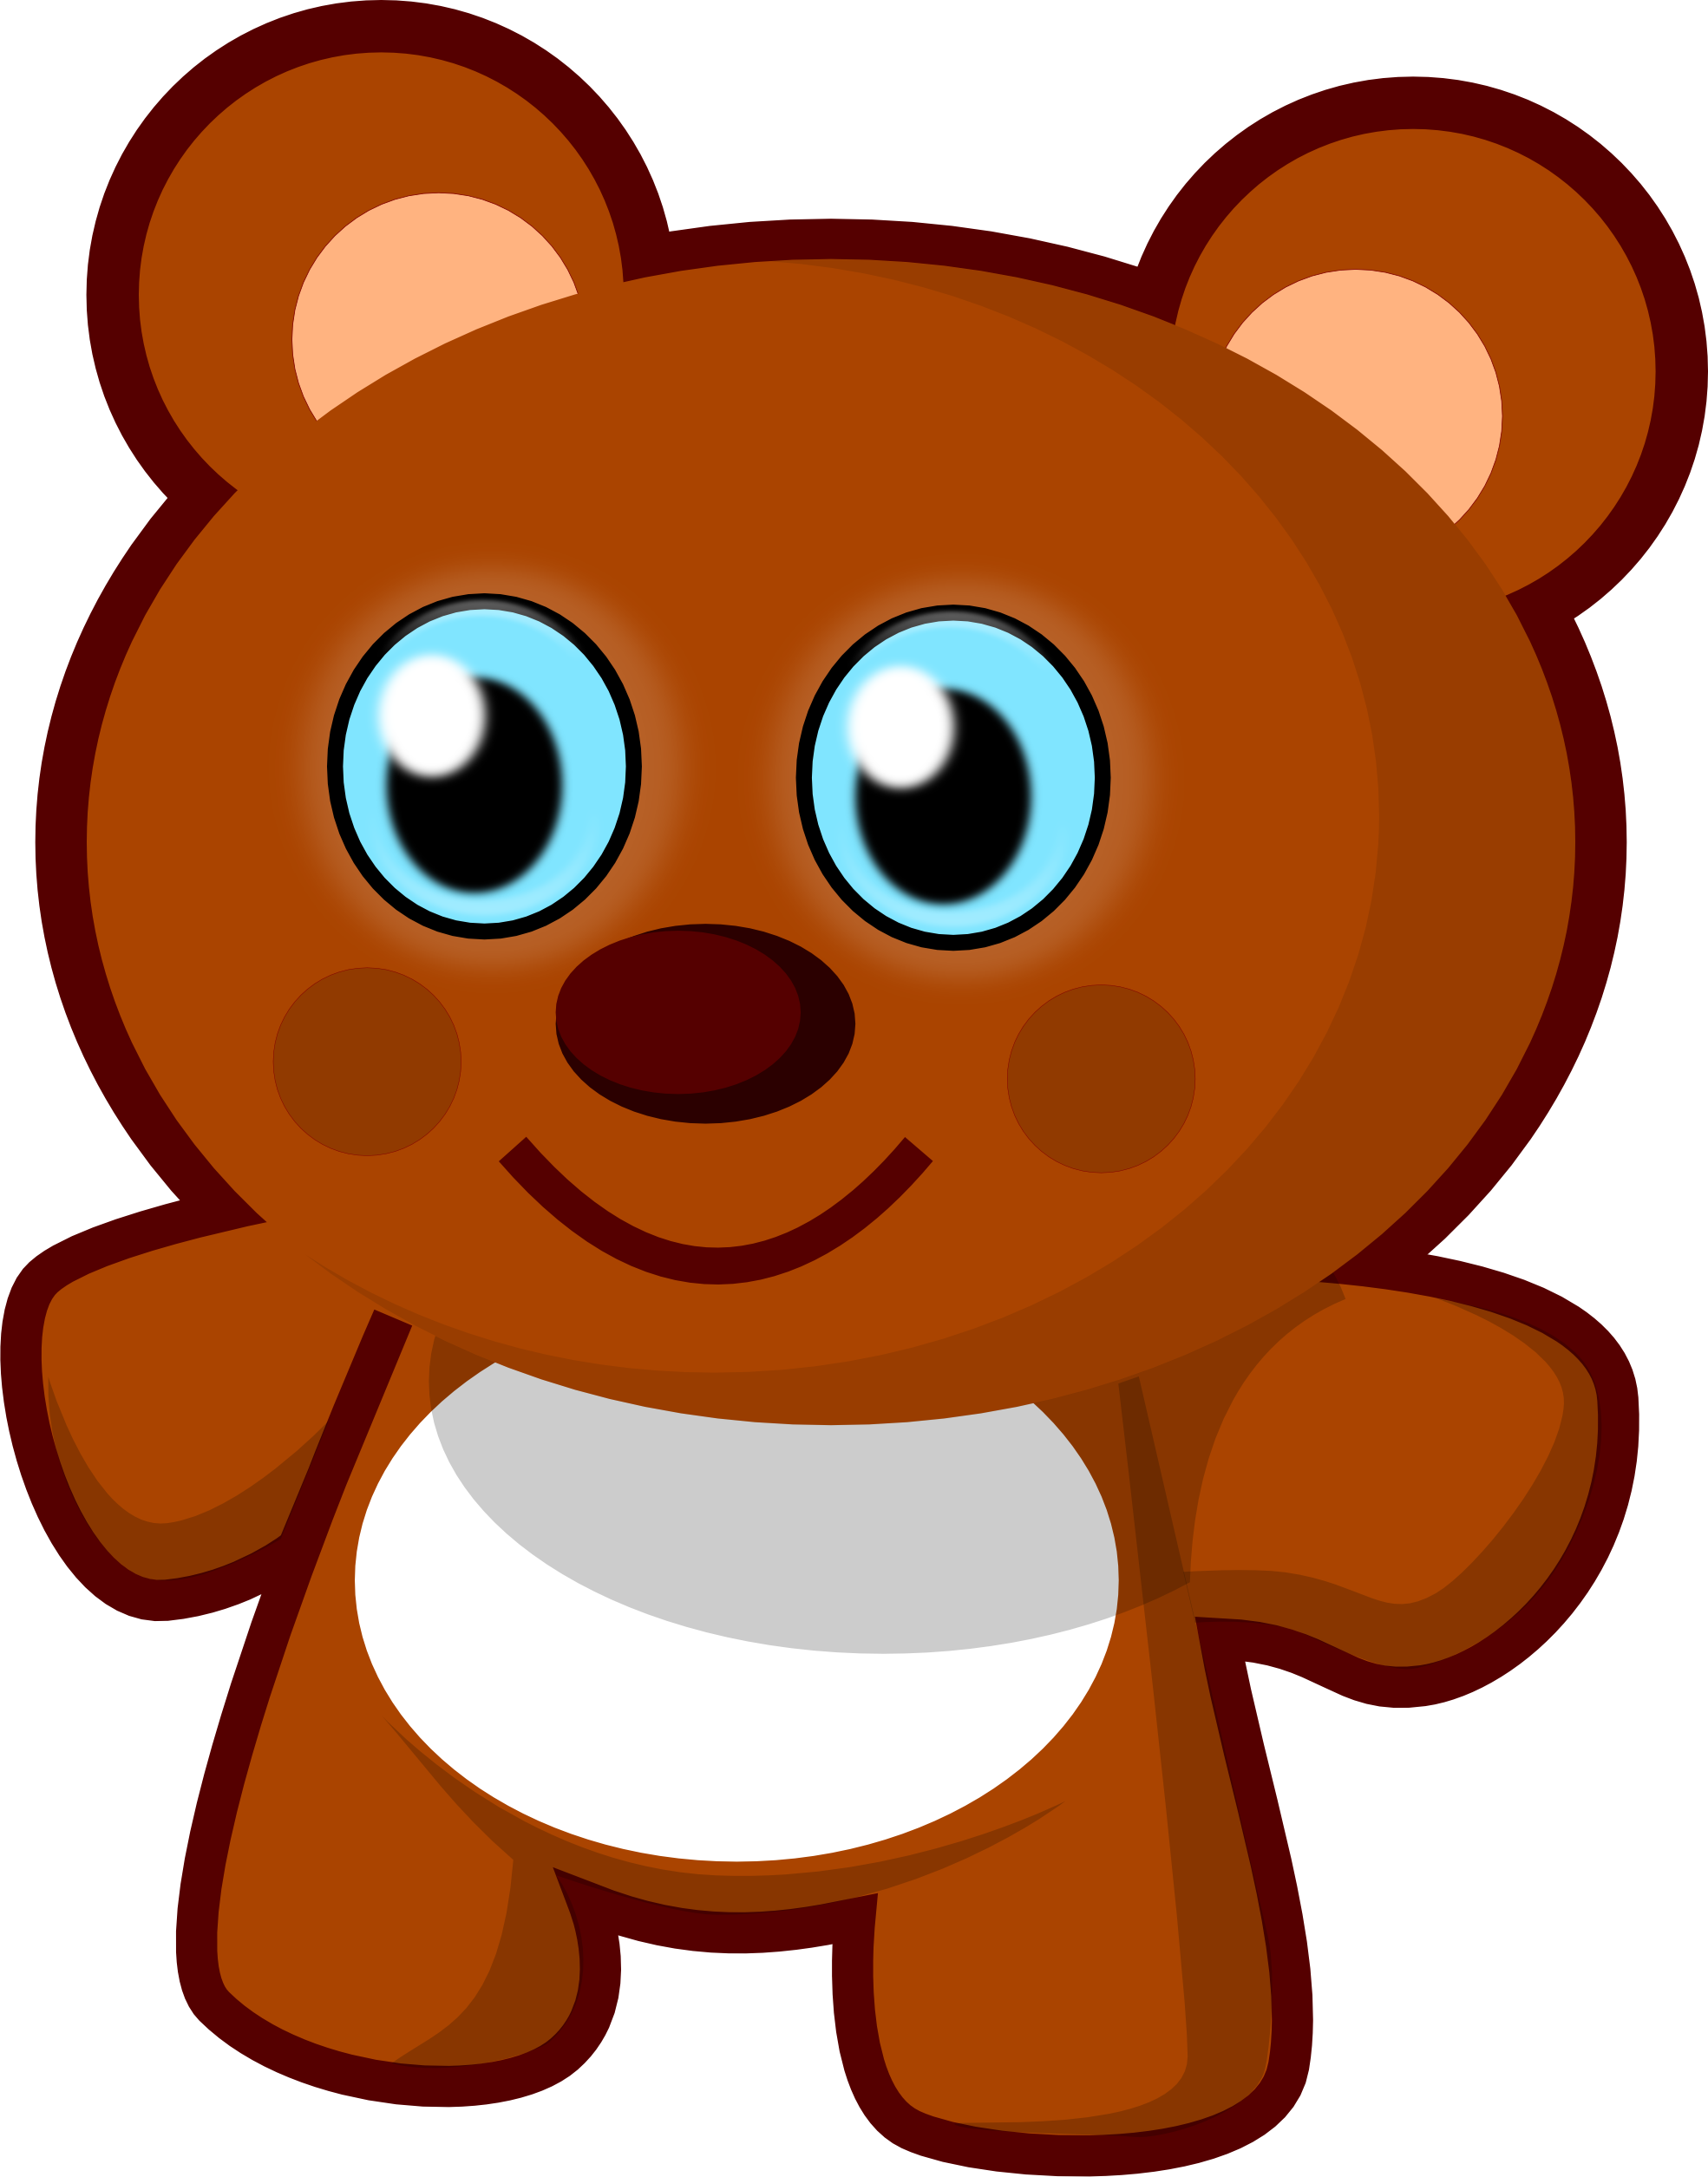 Clipart kids library.  collection of cute